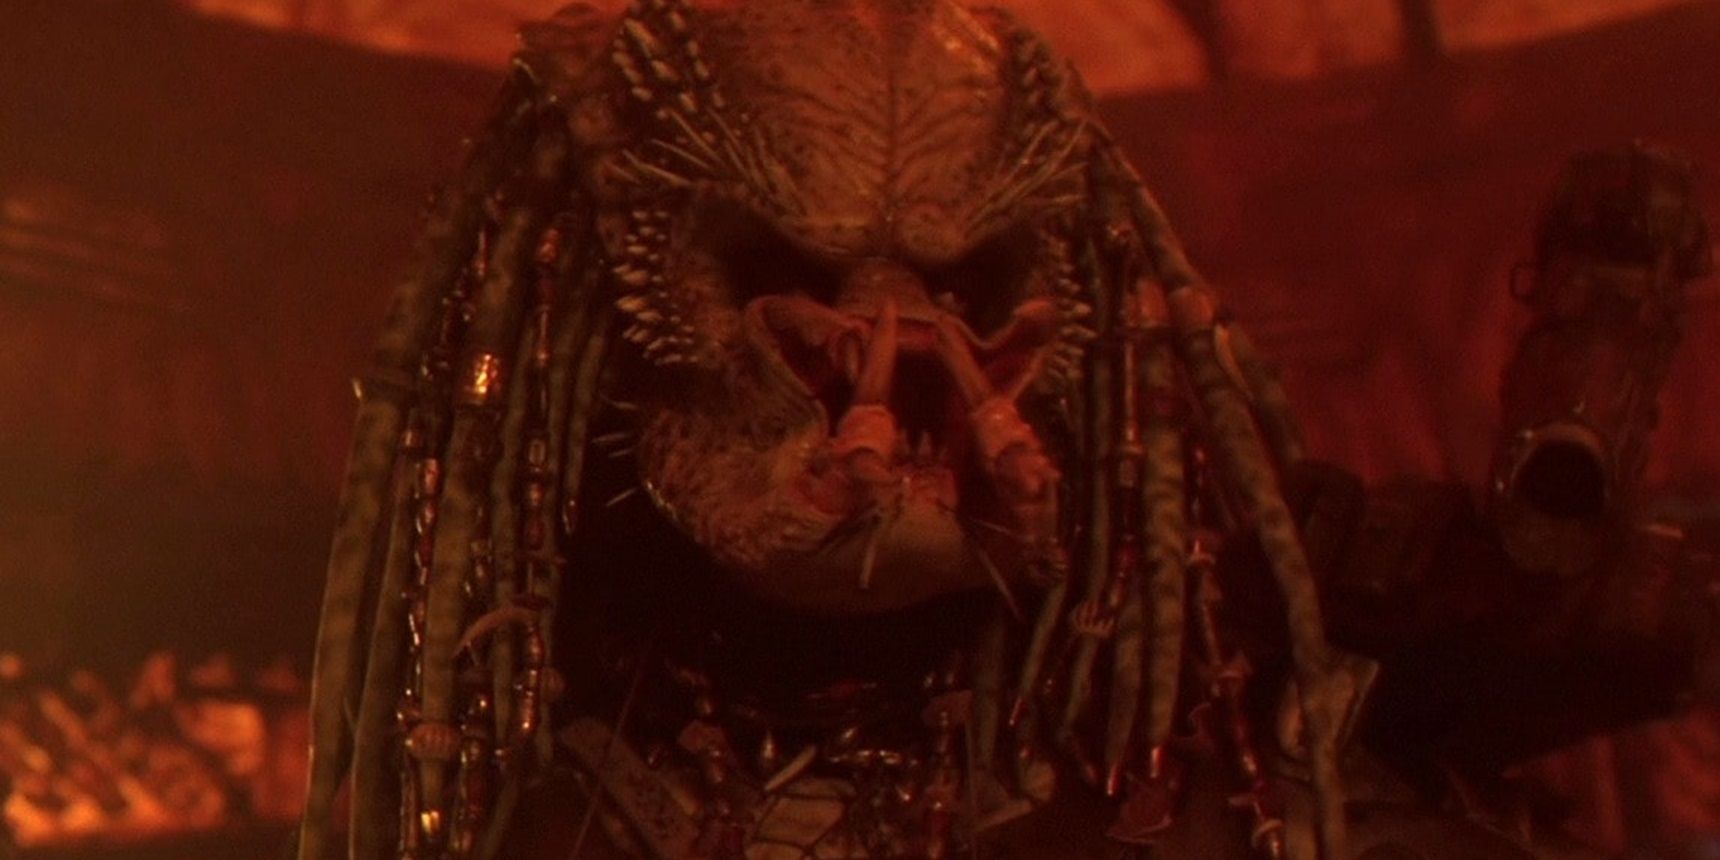 The Predator Franchise Has Only Had One Significant Returning Character (& They’re Not Human)